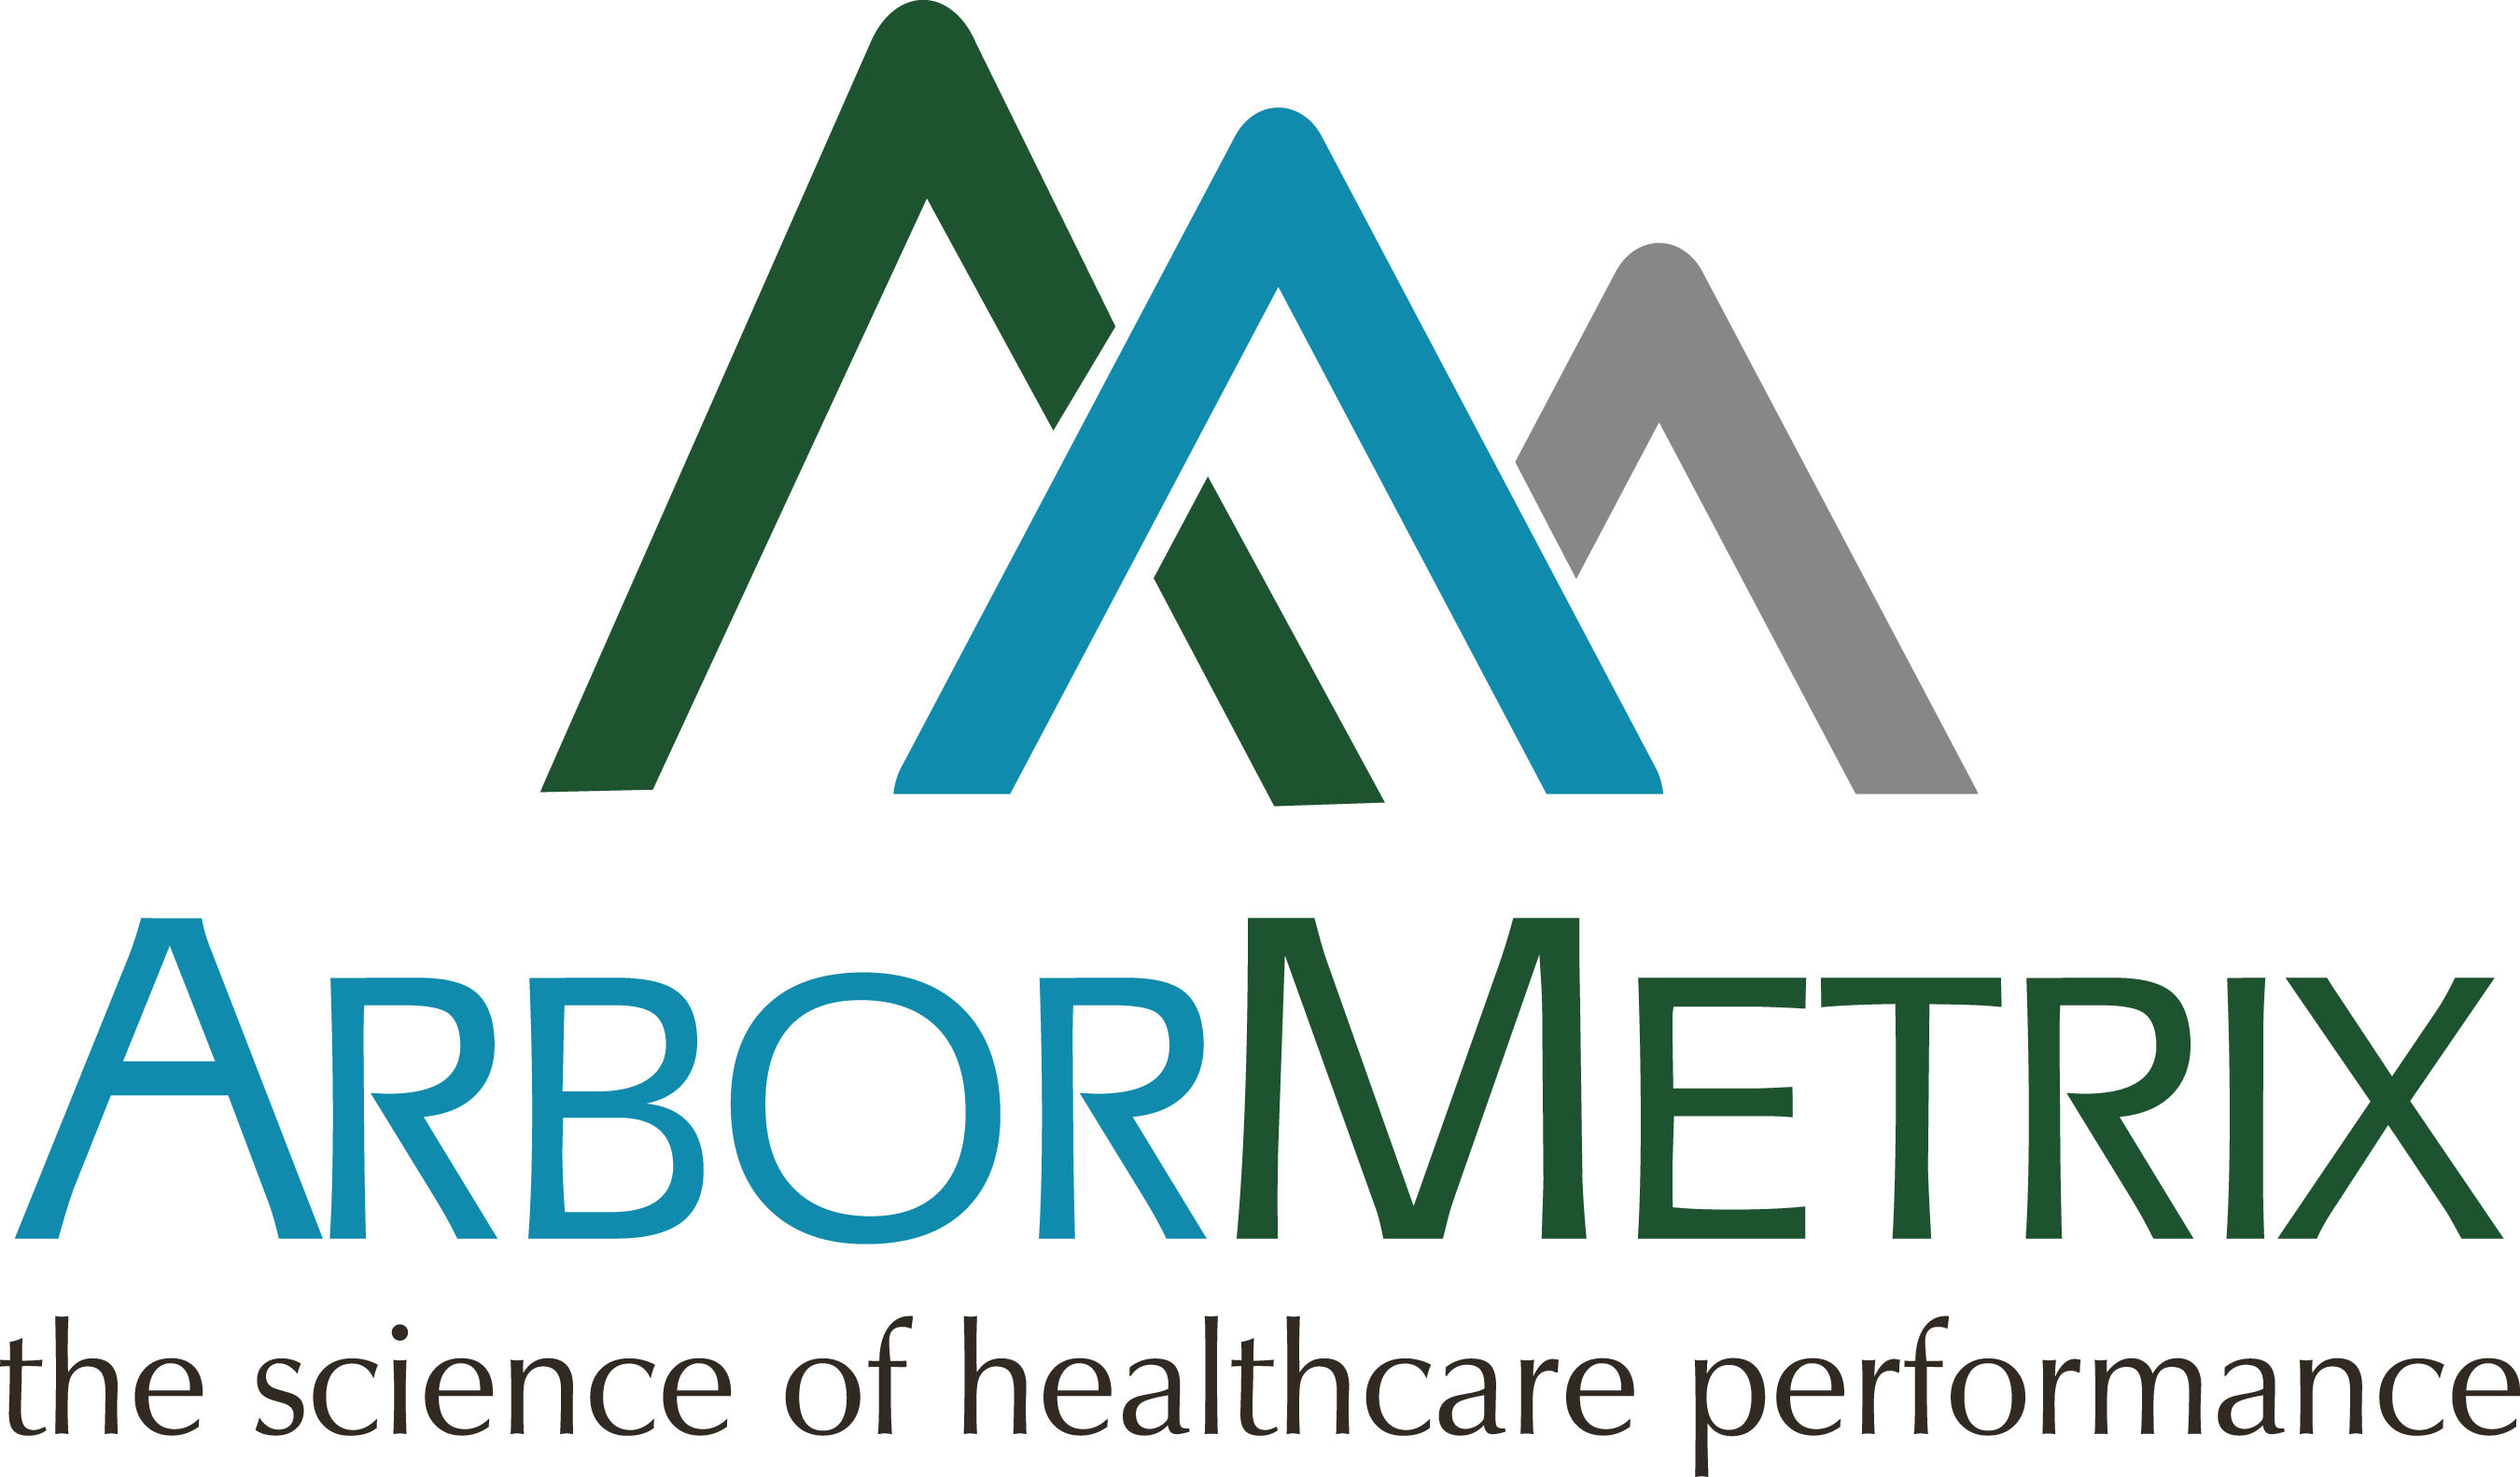 ArborMetrix, Inc. provides a unique, cloud-based platform for performance measurement and clinical intelligence in acute and specialty care. ArborMetrix solutions deliver rigorous data analysis and actionable business intelligence while incorporating advanced risk and reliability adjustments. With valuable insights grounded in clinical evidence, ArborMetrix clients quickly achieve quality improvements and cost savings. (PRNewsFoto/ArborMetrix) (PRNewsFoto/ARBORMETRIX) (PRNewsFoto/ARBORMETRIX)